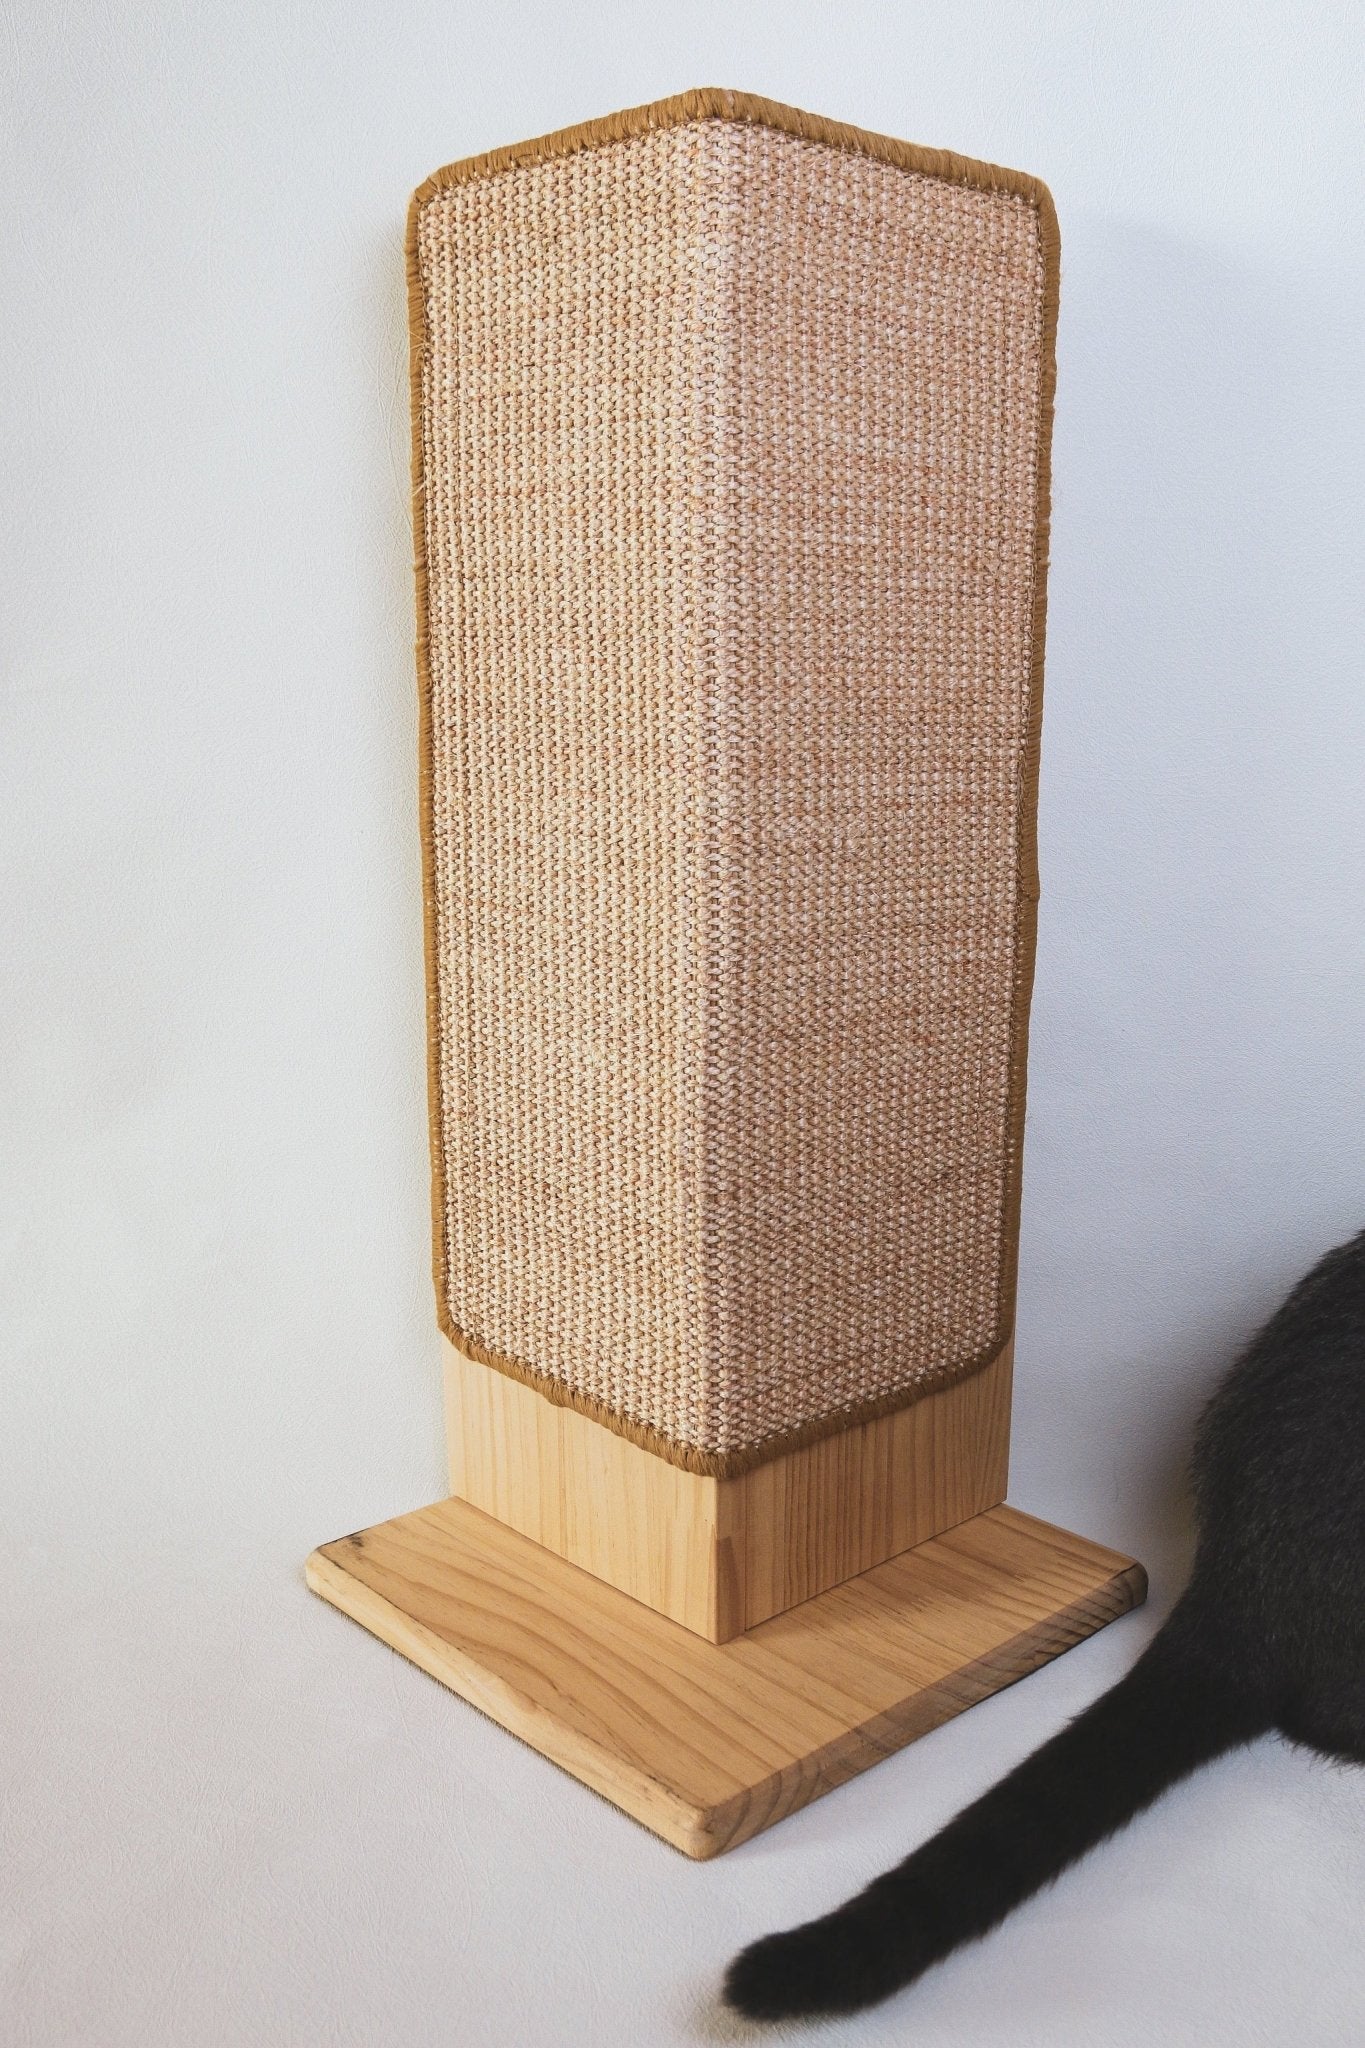 Willow scratching post - Ume's Stash